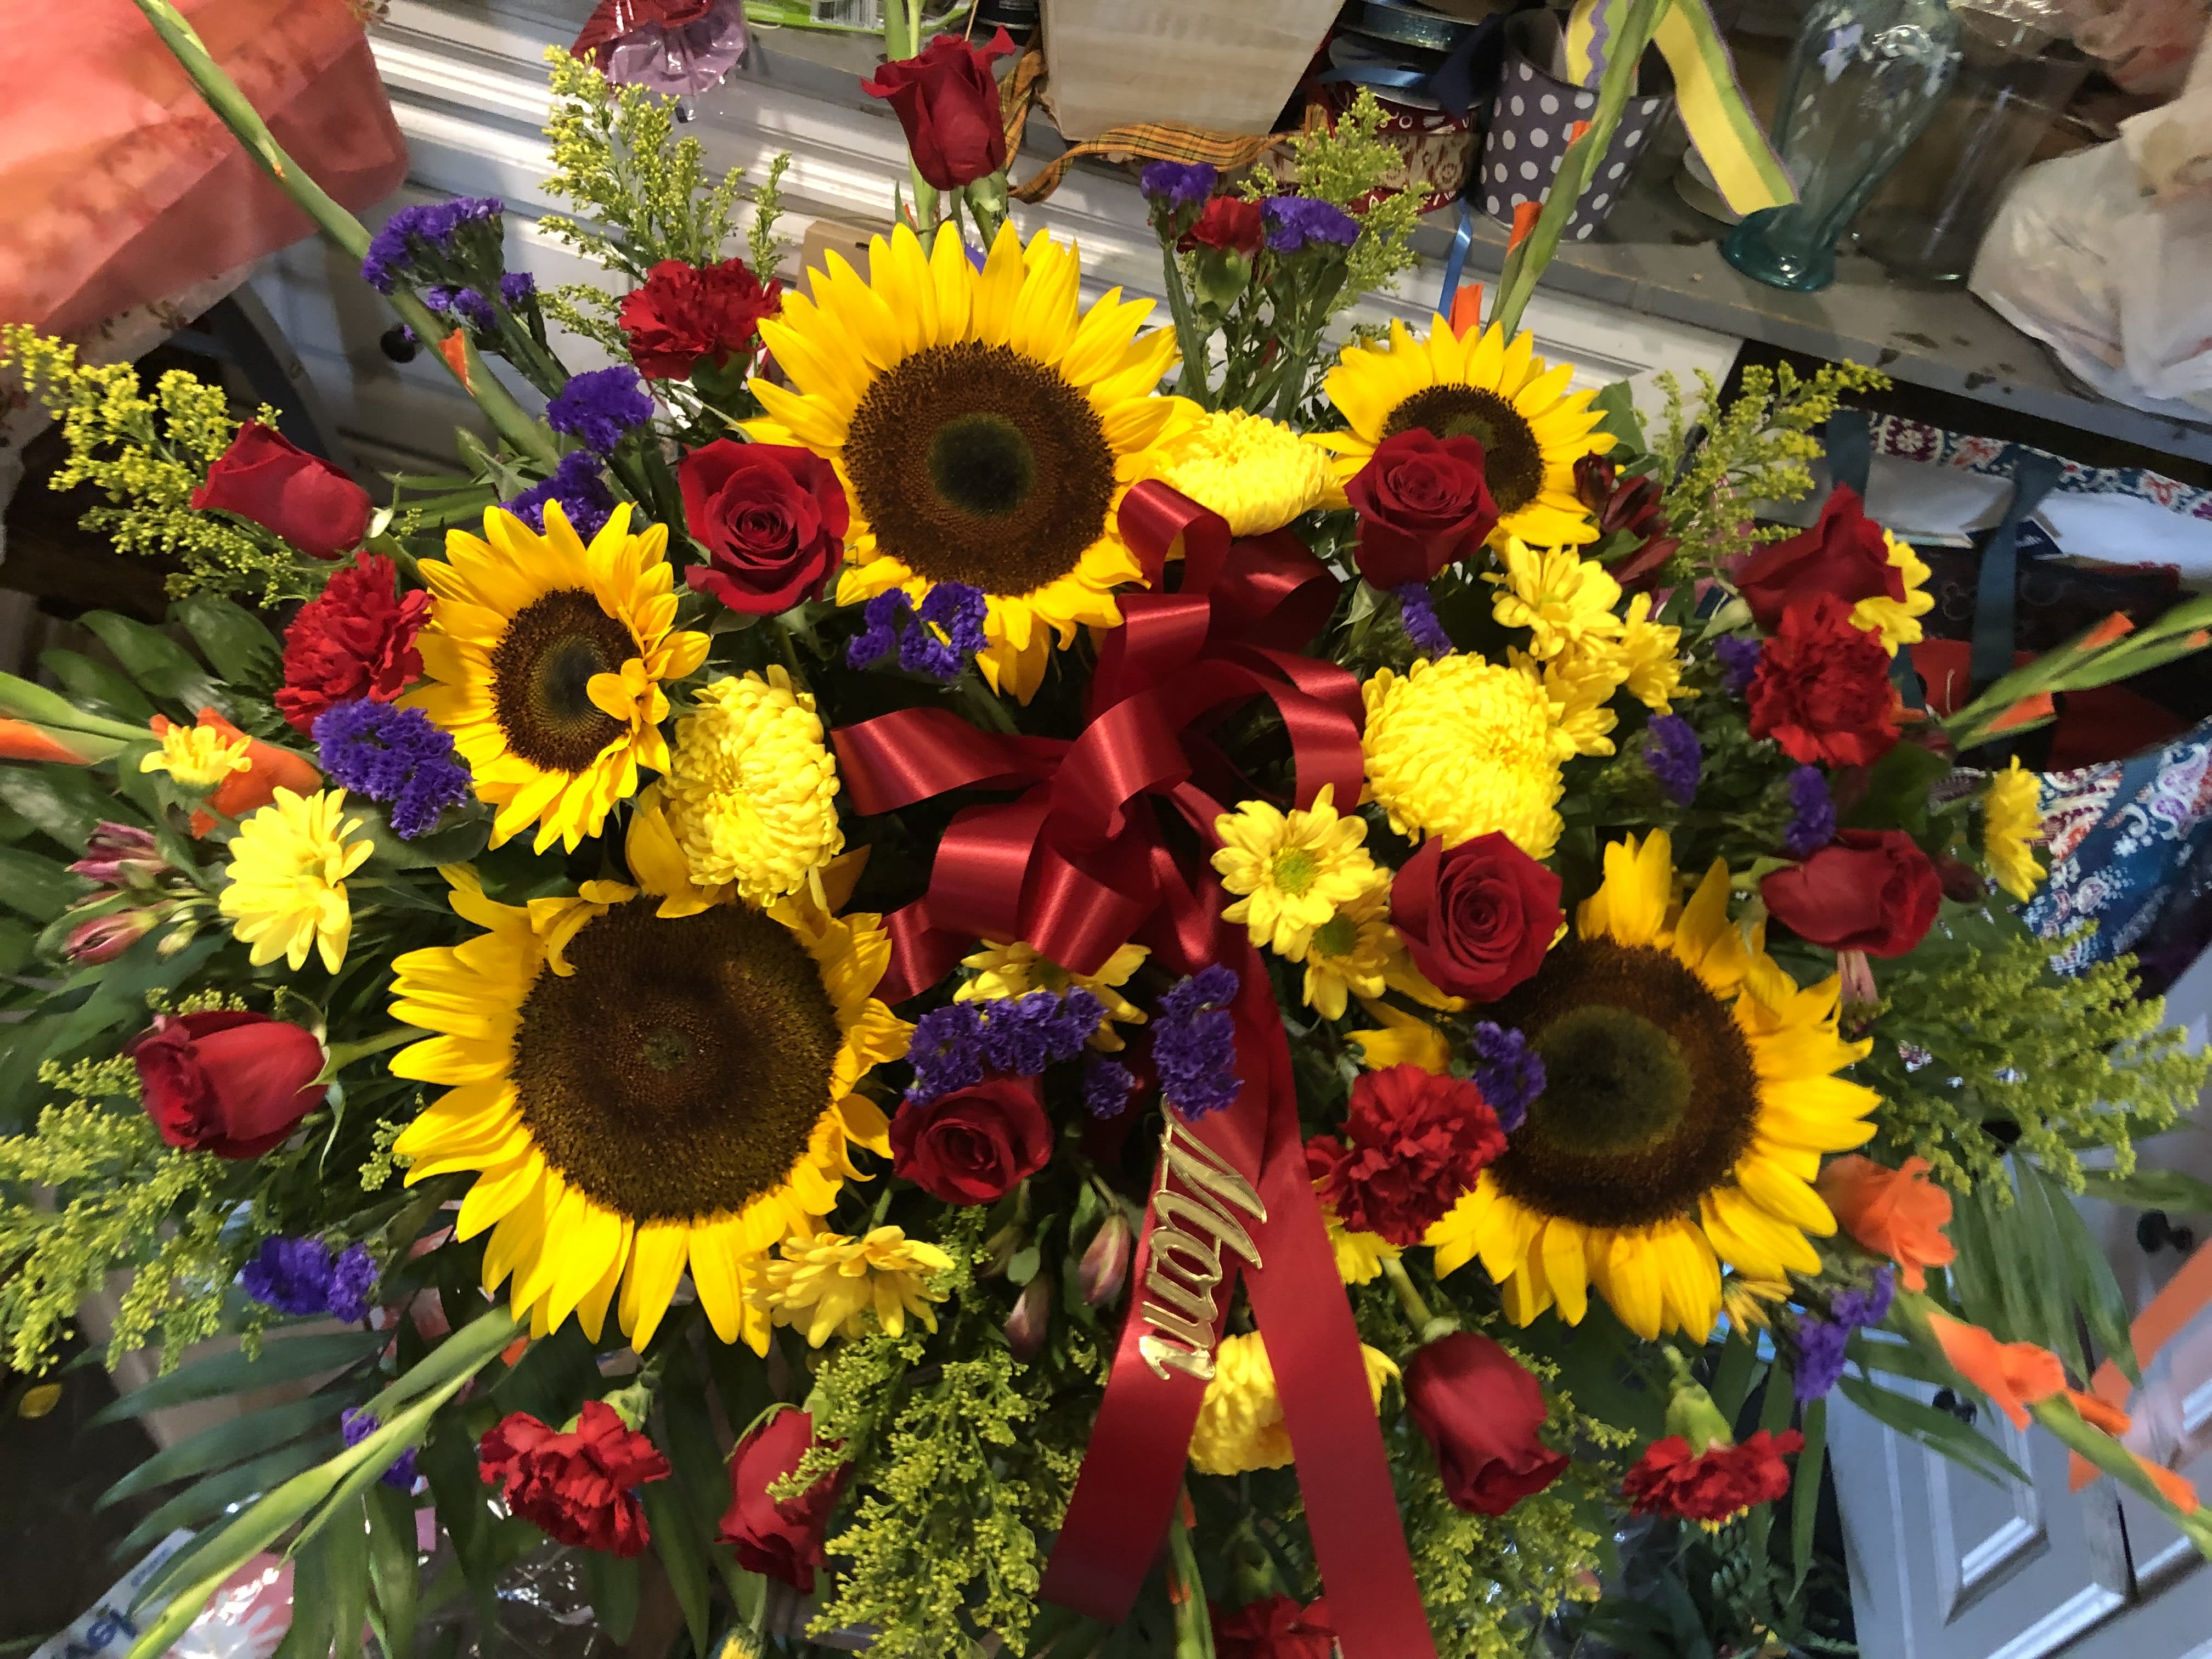 Love Lives On Casket Spray  - Honor a bright, beautiful life with this colorful burst of sunflowers, roses,  and daisies that will add a rainbow of hope to the service. (1/2 Casket Spray Shown)